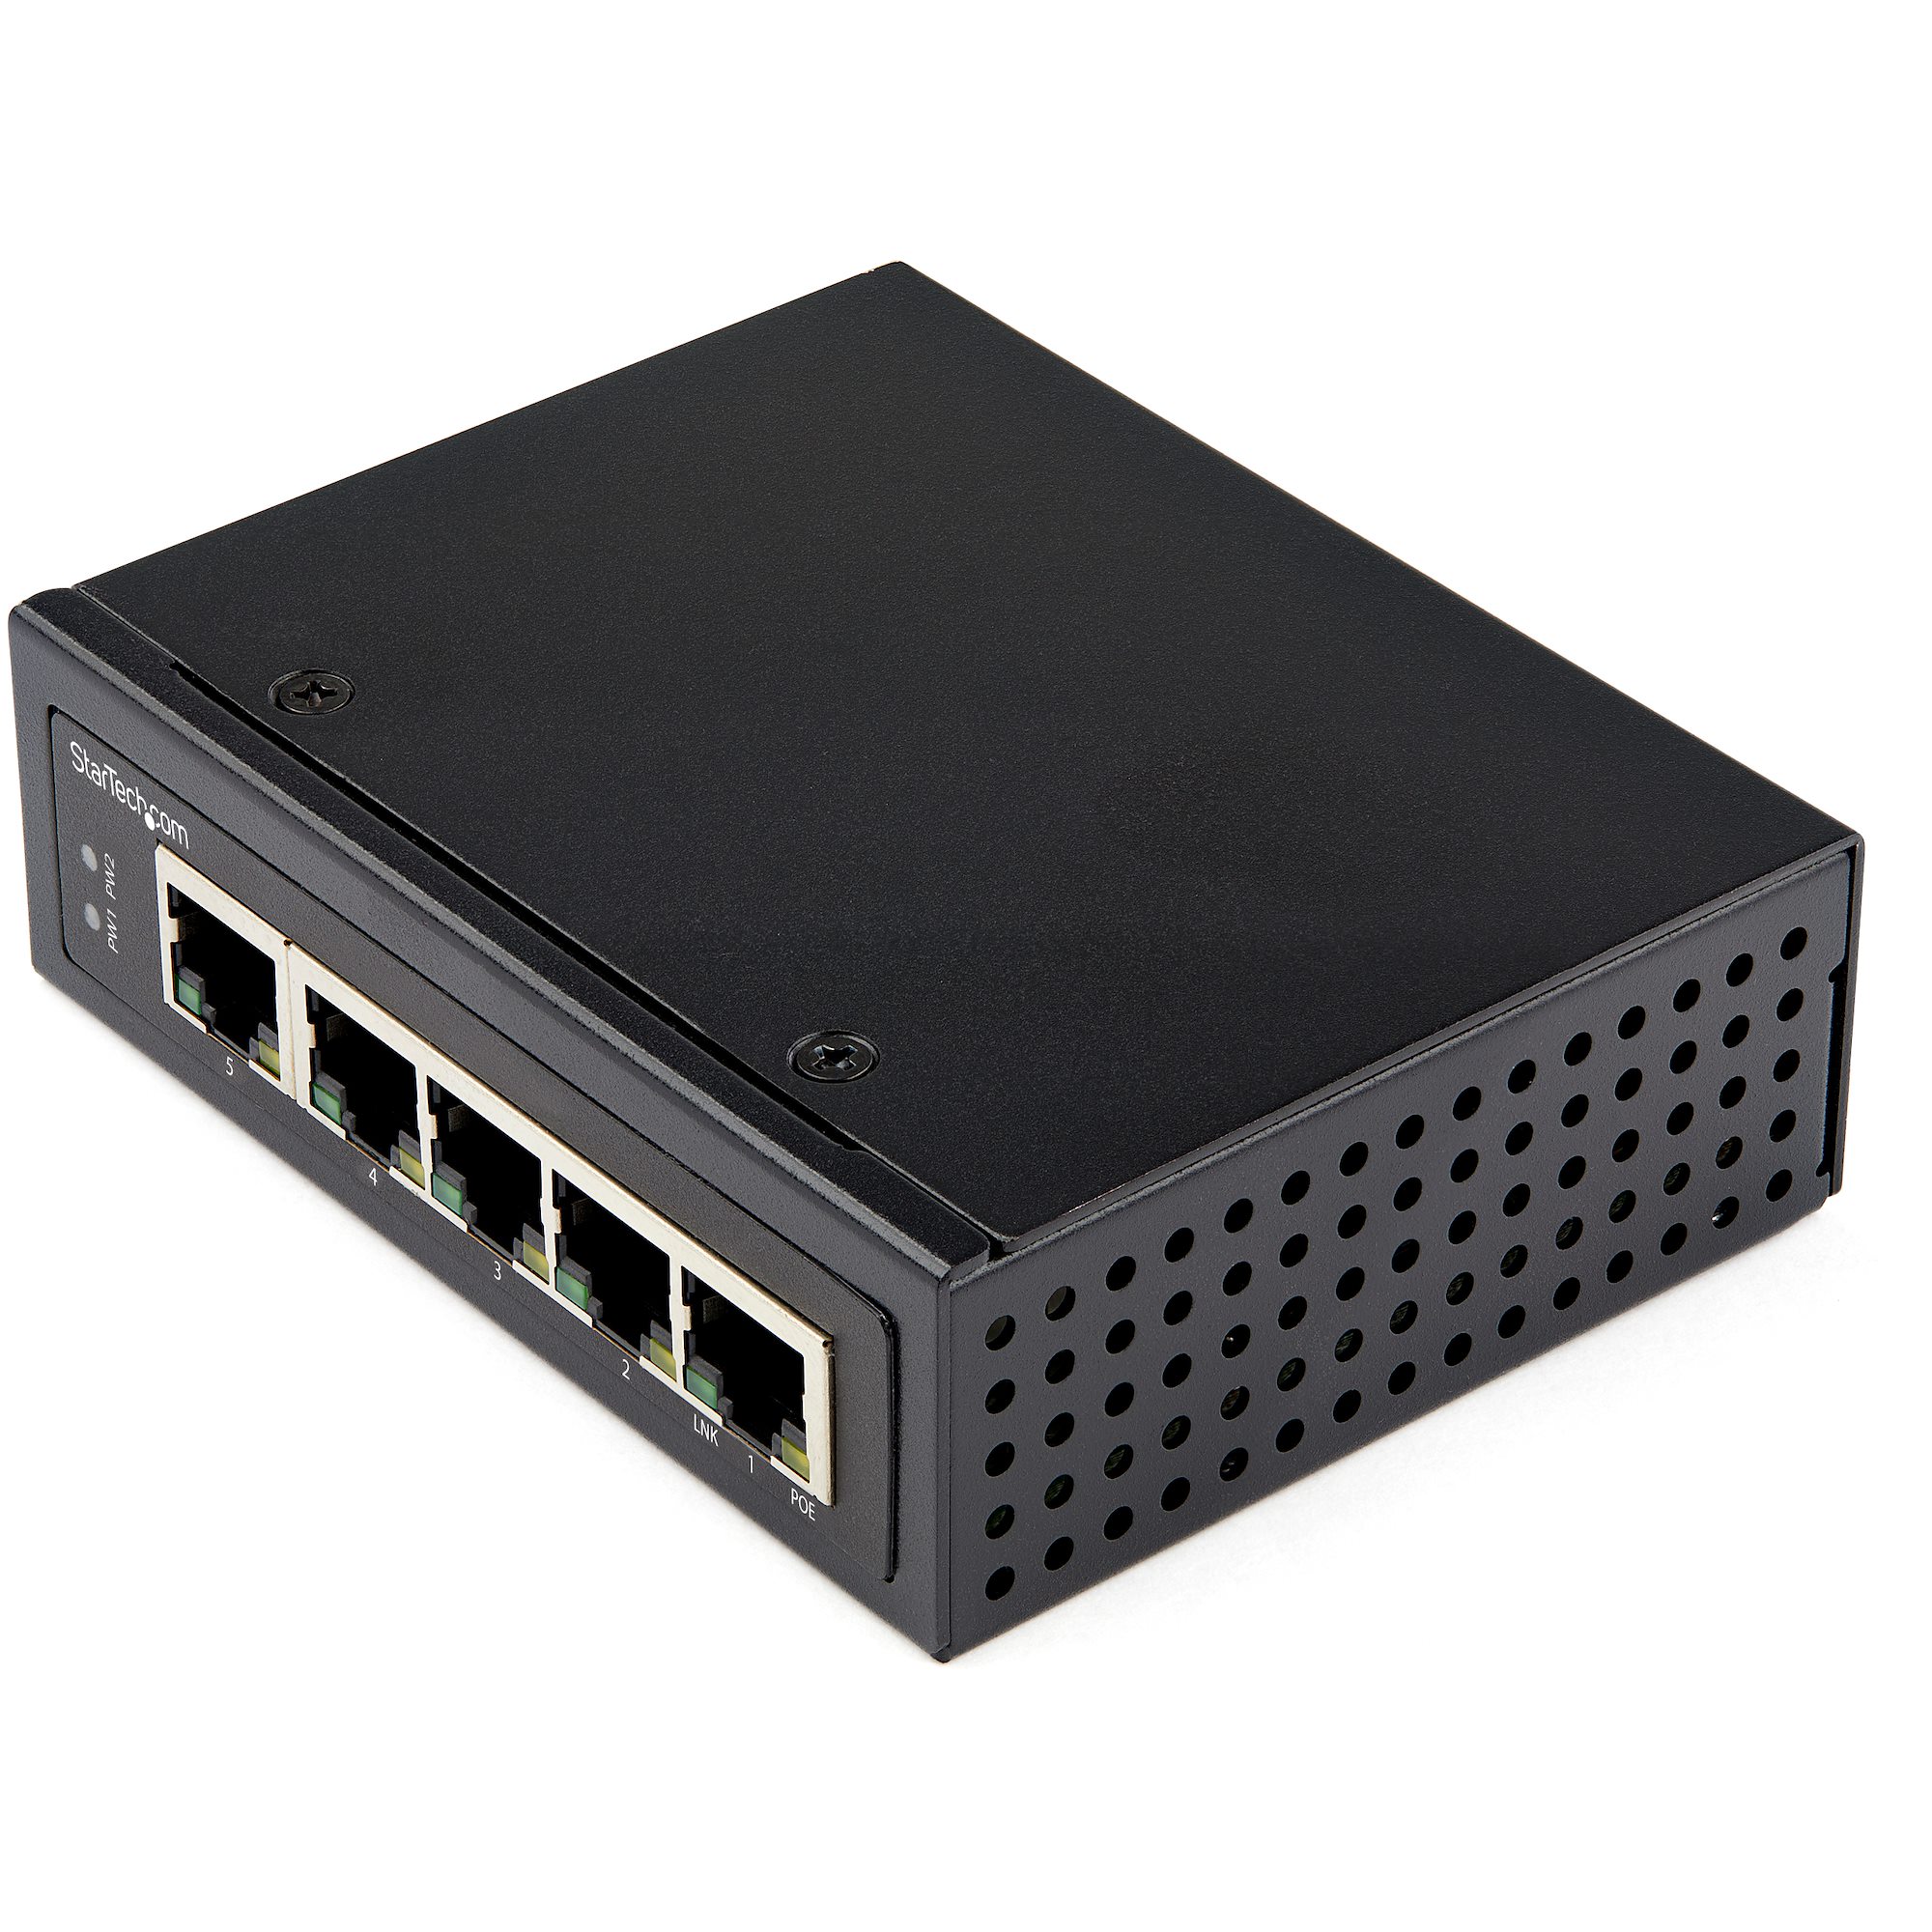 Industrial 5 Port Gigabit PoE Switch - 30W - Power Over Ethernet Switch -  Hardened GbE PoE+ Unmanaged Switch - Rugged High Power Gigabit Network